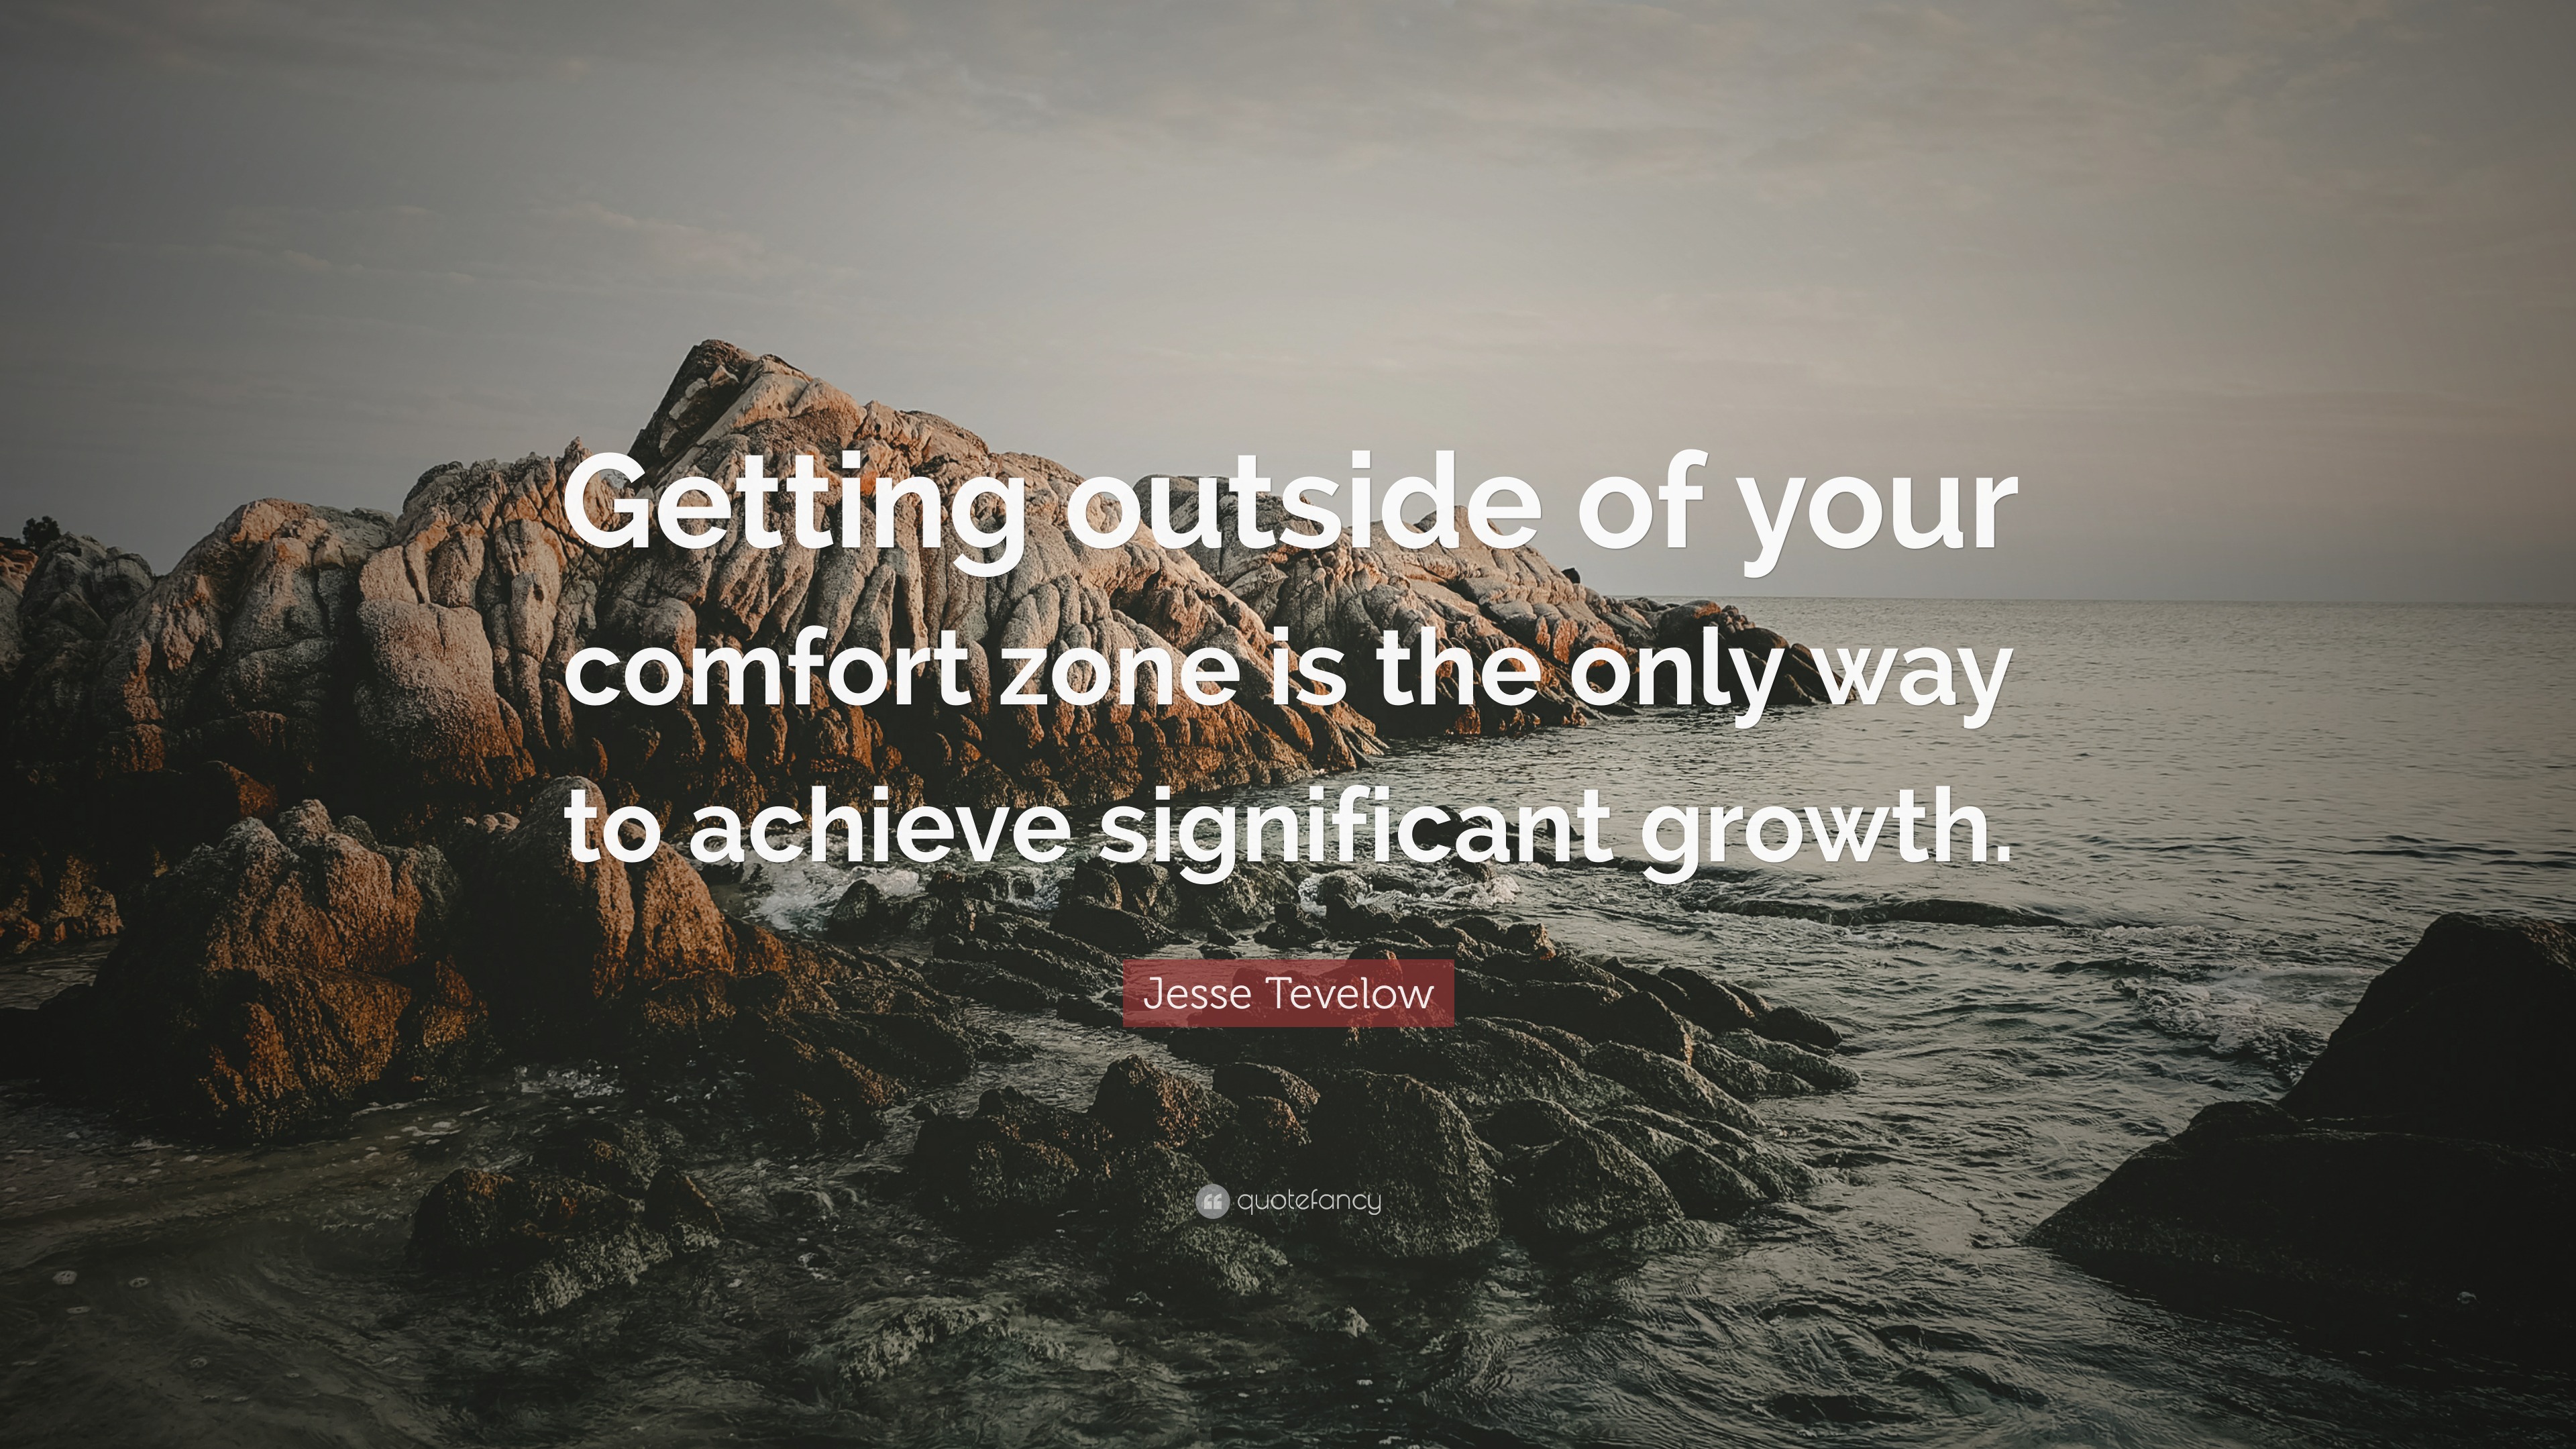 Your Comfort Zone Is This Way - ALIVE Outdoors